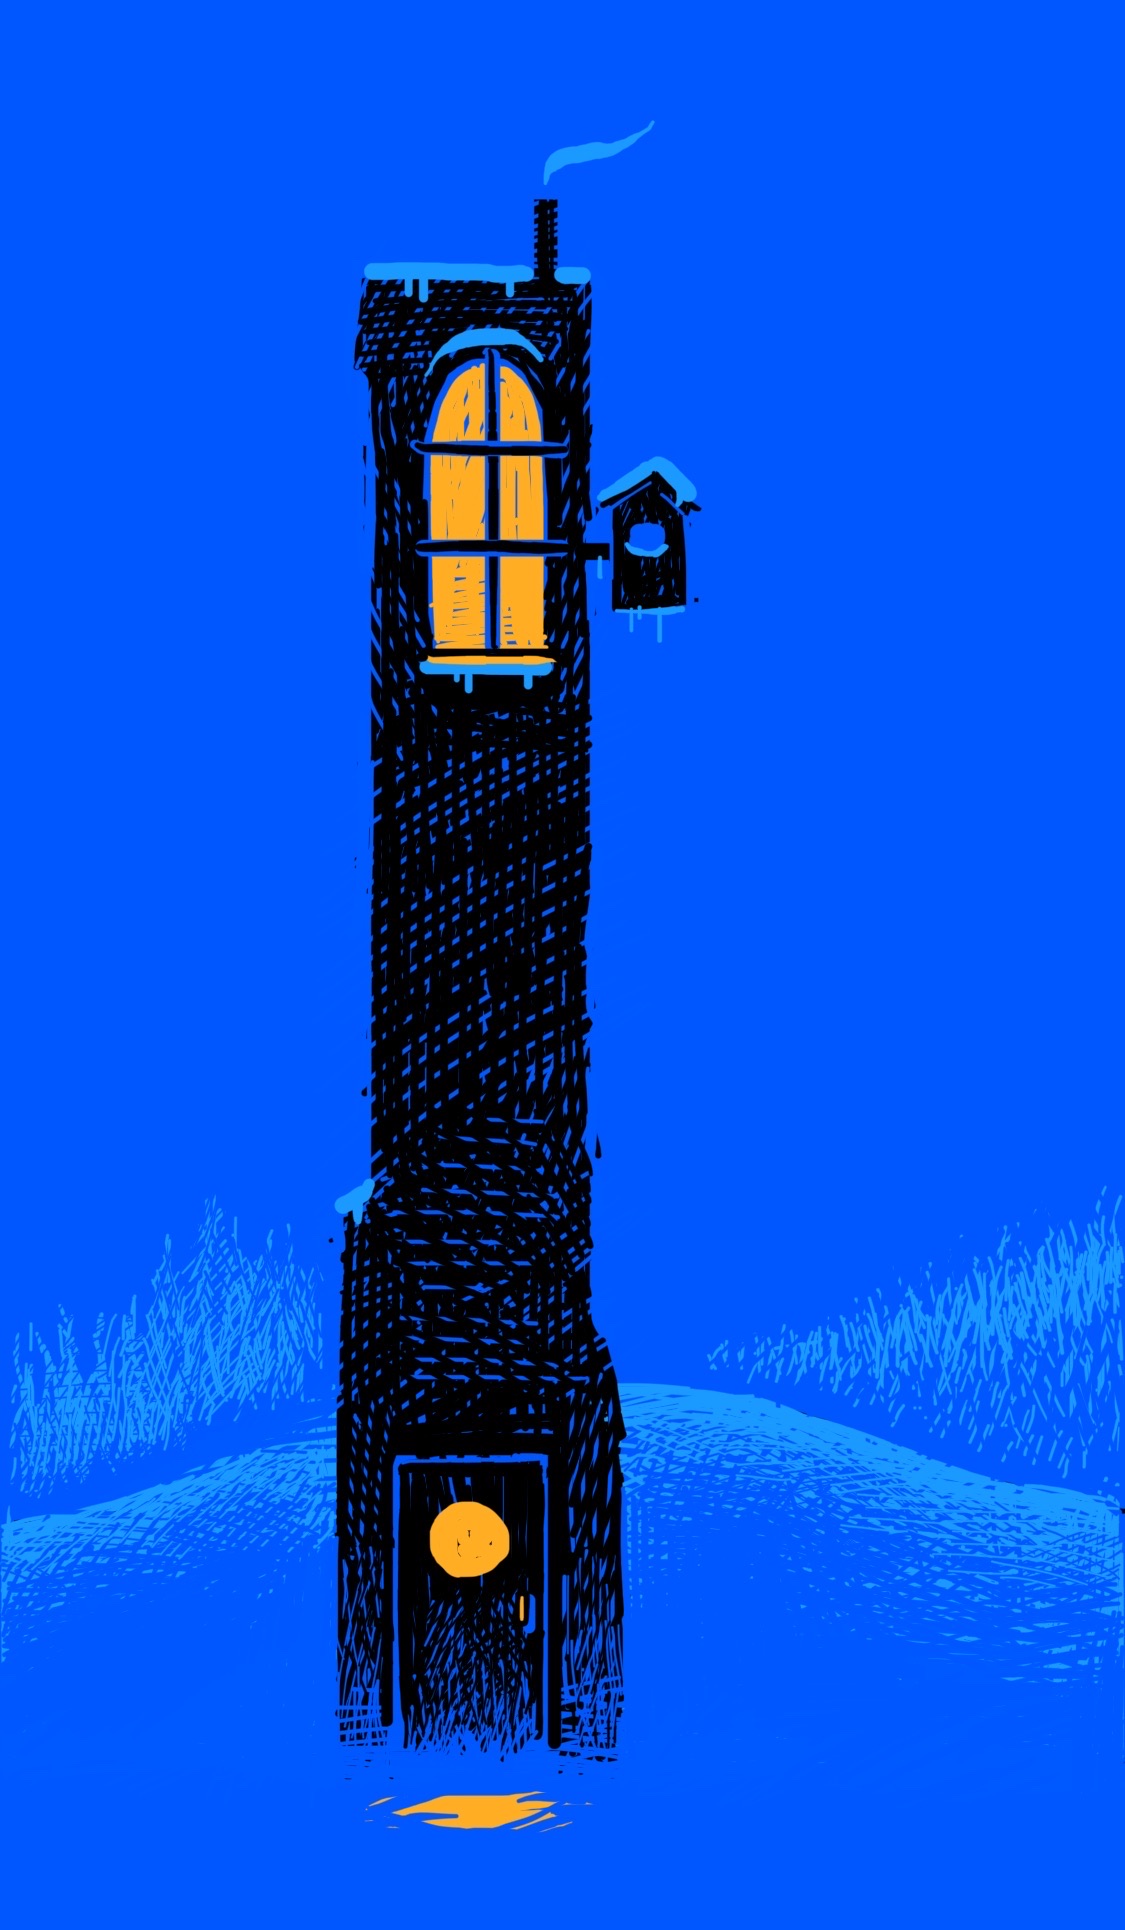 A tall, very narrow tower in the middle of a snowy field